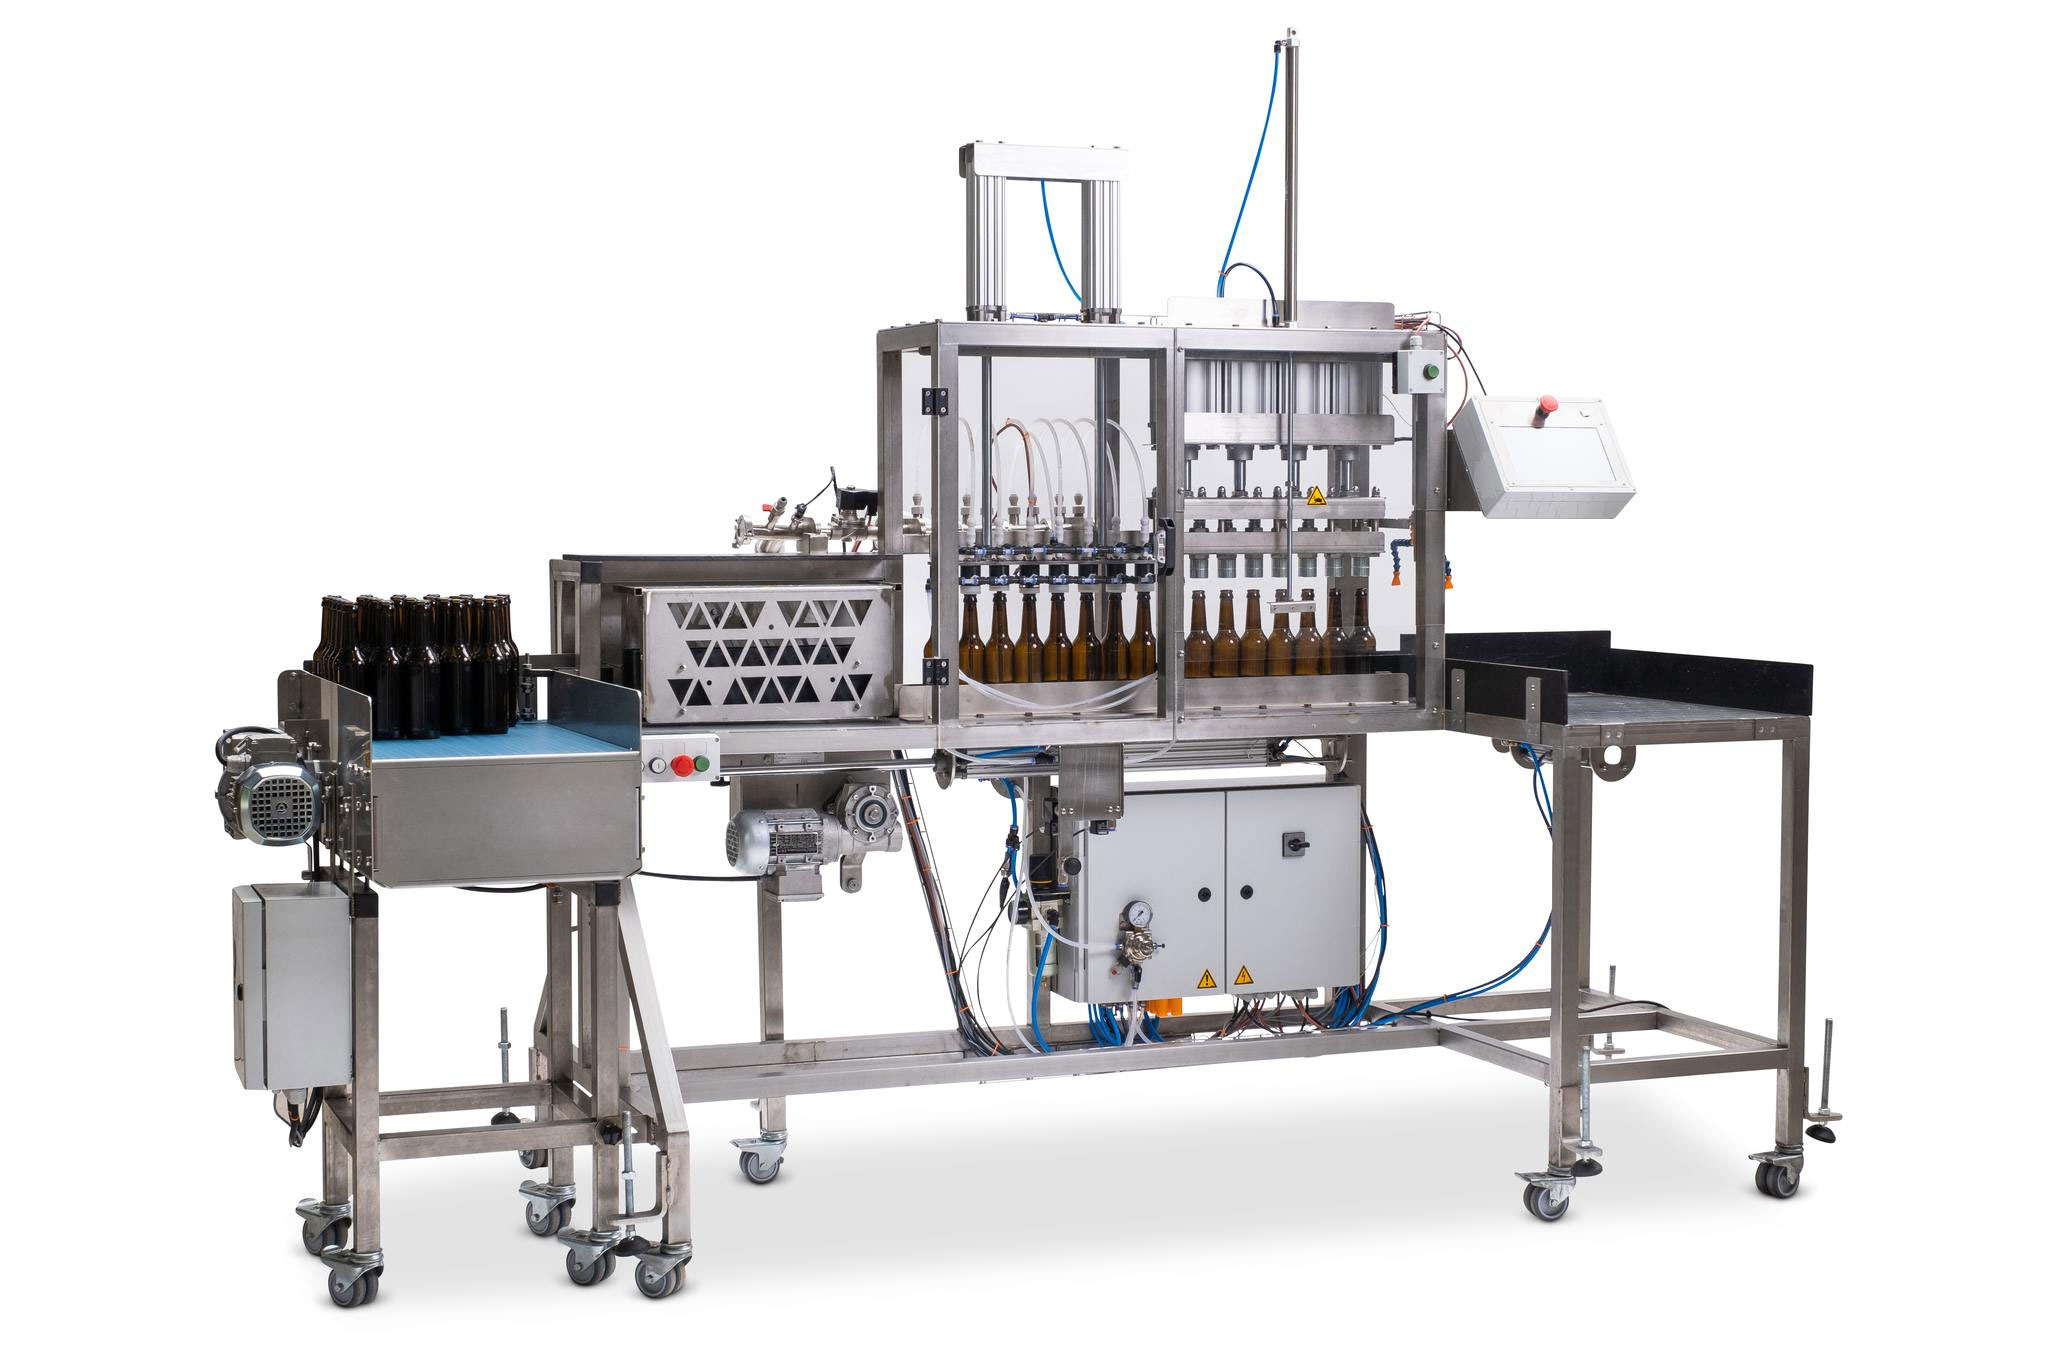 Automatic counter-pressure bottle filling machine (up to 2200 bottles per hour)